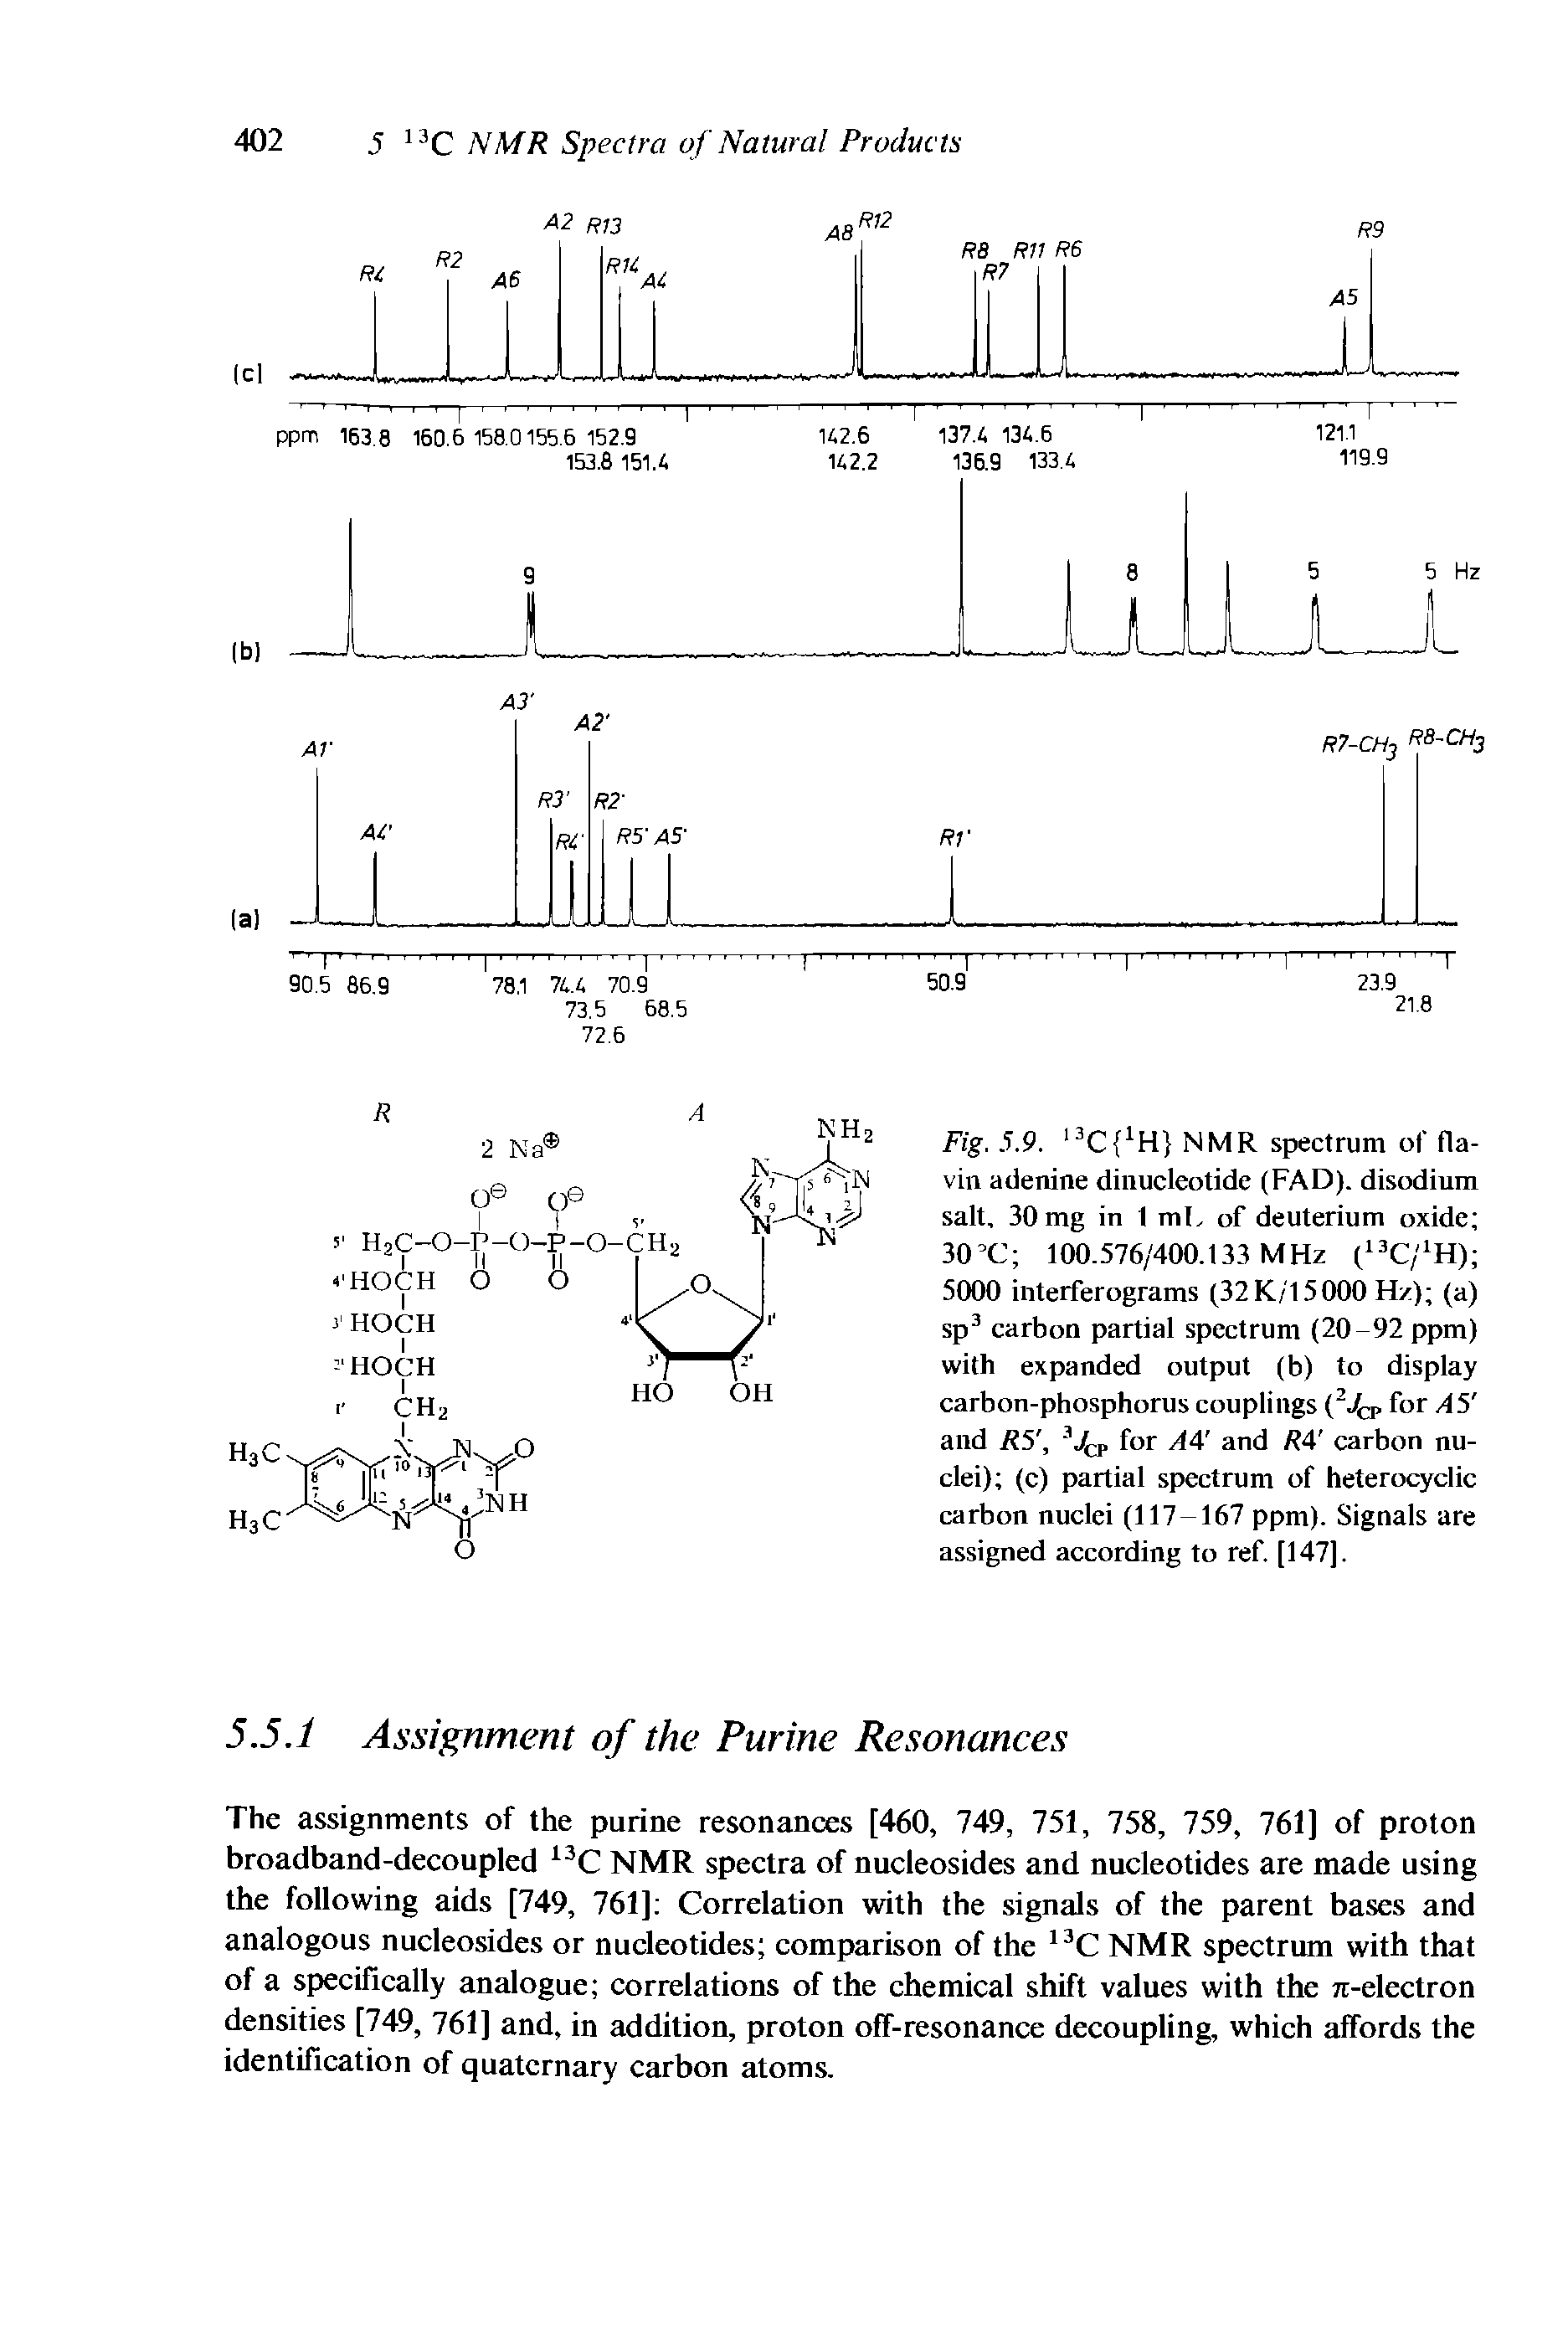 Fig. 5.9. 13Cf1 - NMR spectrum of flavin adenine dinucleotide (FAD), disodium salt, 30 mg in 1 ml, of deuterium oxide 30 °C 100.576/400.133 MHz (13C/ H) 5000 interferograms (32K/15000 Hz) (a) sp3 carbon partial spectrum (20-92 ppm) with expanded output (b) to display carbon-phosphorus couplings (2JCI, for A5 and R5 3Jcr for A4 and R4 carbon nuclei) (c) partial spectrum of heterocyclic carbon nuclei (117-167 ppm). Signals are assigned according to ref. [147].